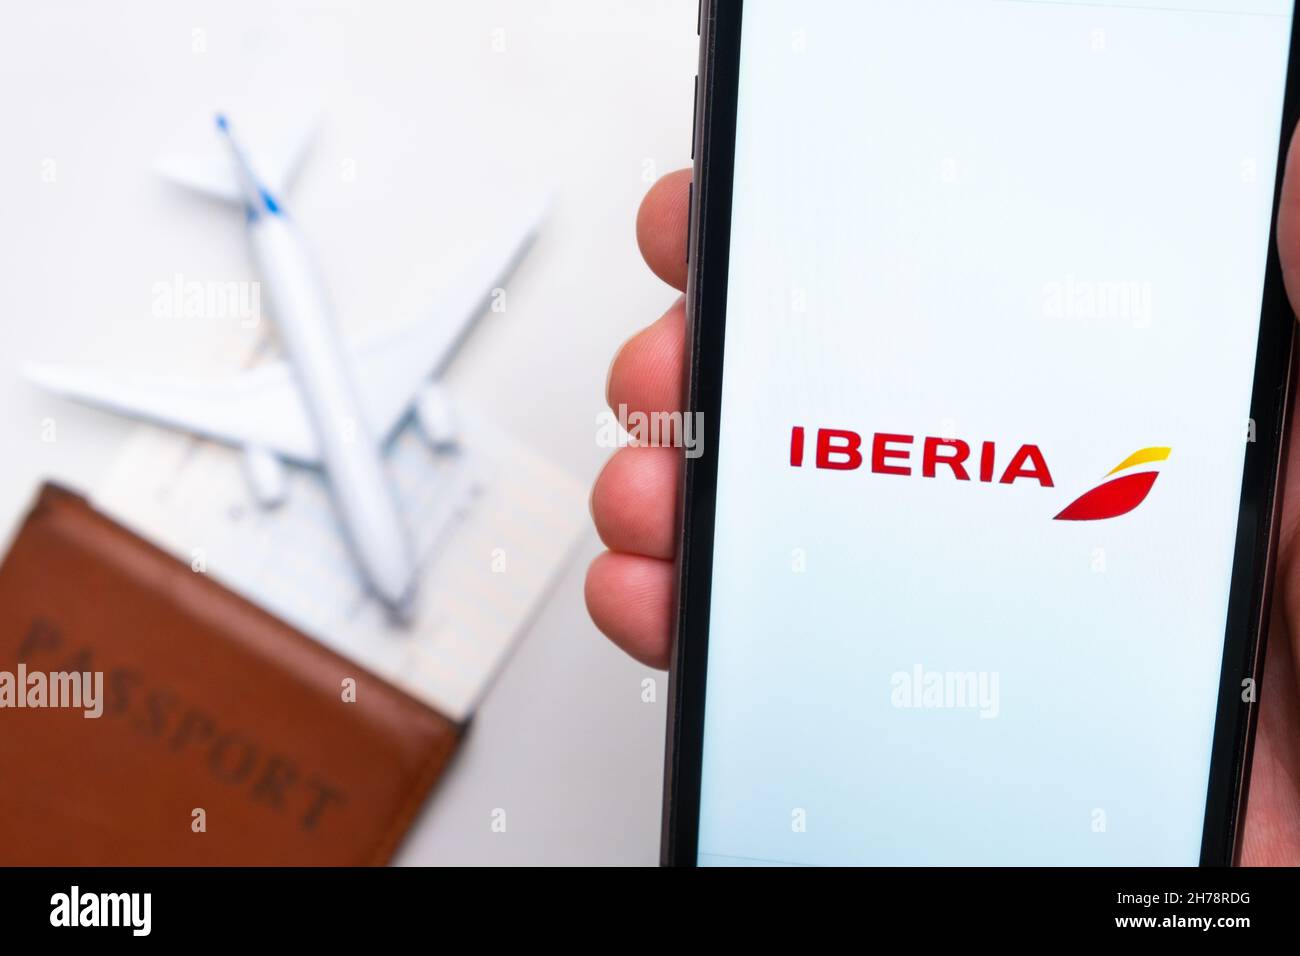 Iberia Airline application on the screen of mobile phone in mans hand. Passport, boarding bass are next to a white plane on the background. November 2021, San Francisco, USA Stock Photo